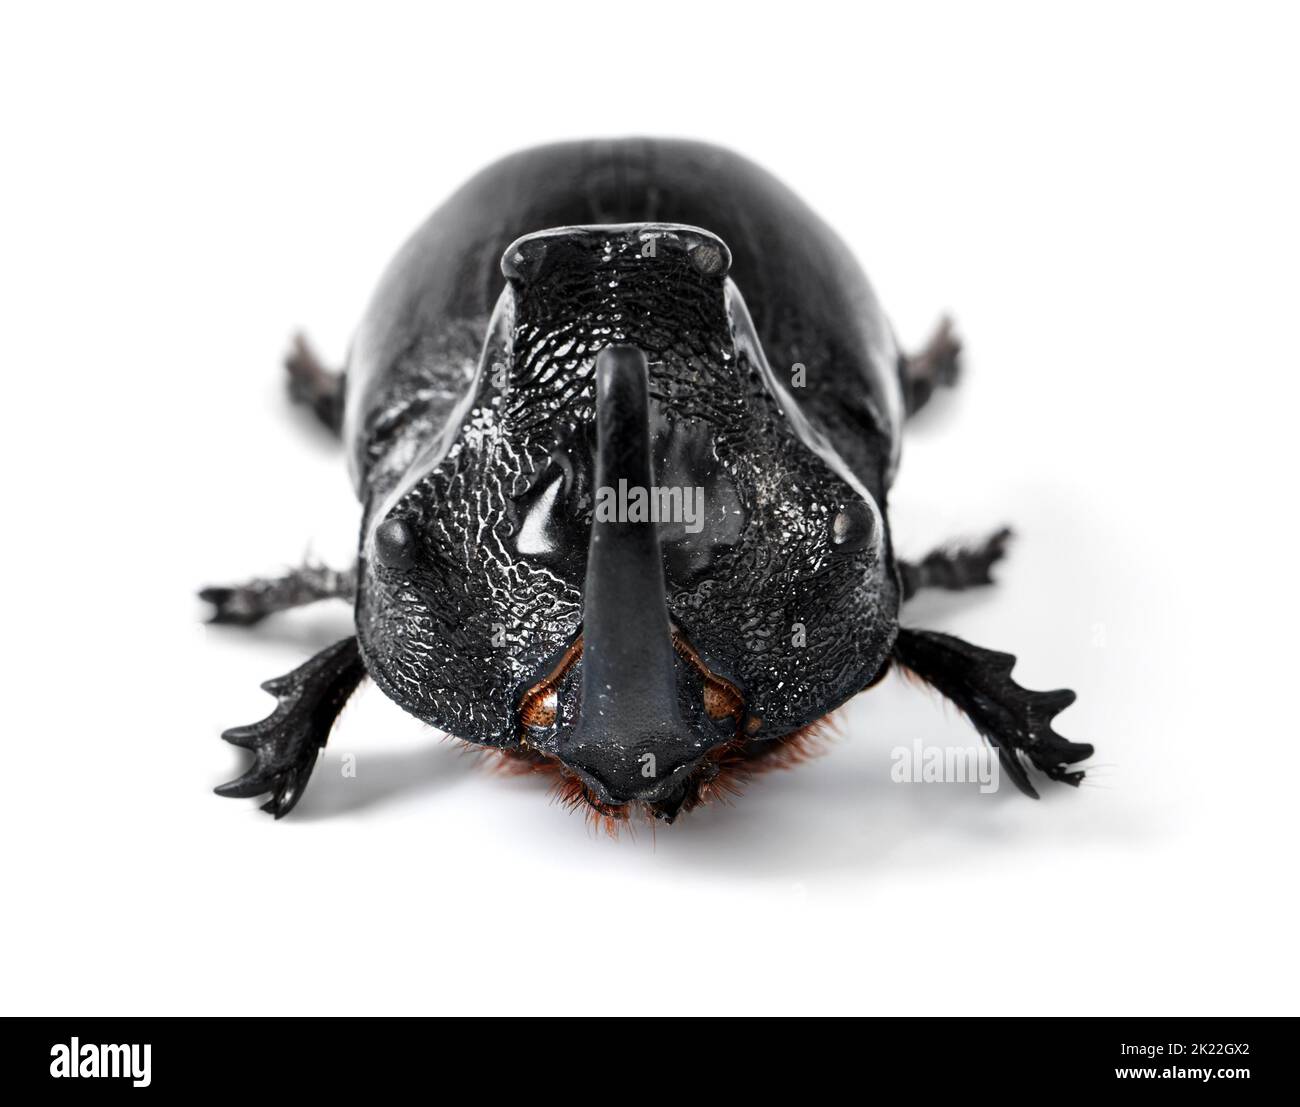 Giant rhino in the making. Closeup side view of a rhinoceros beetle. Stock Photo